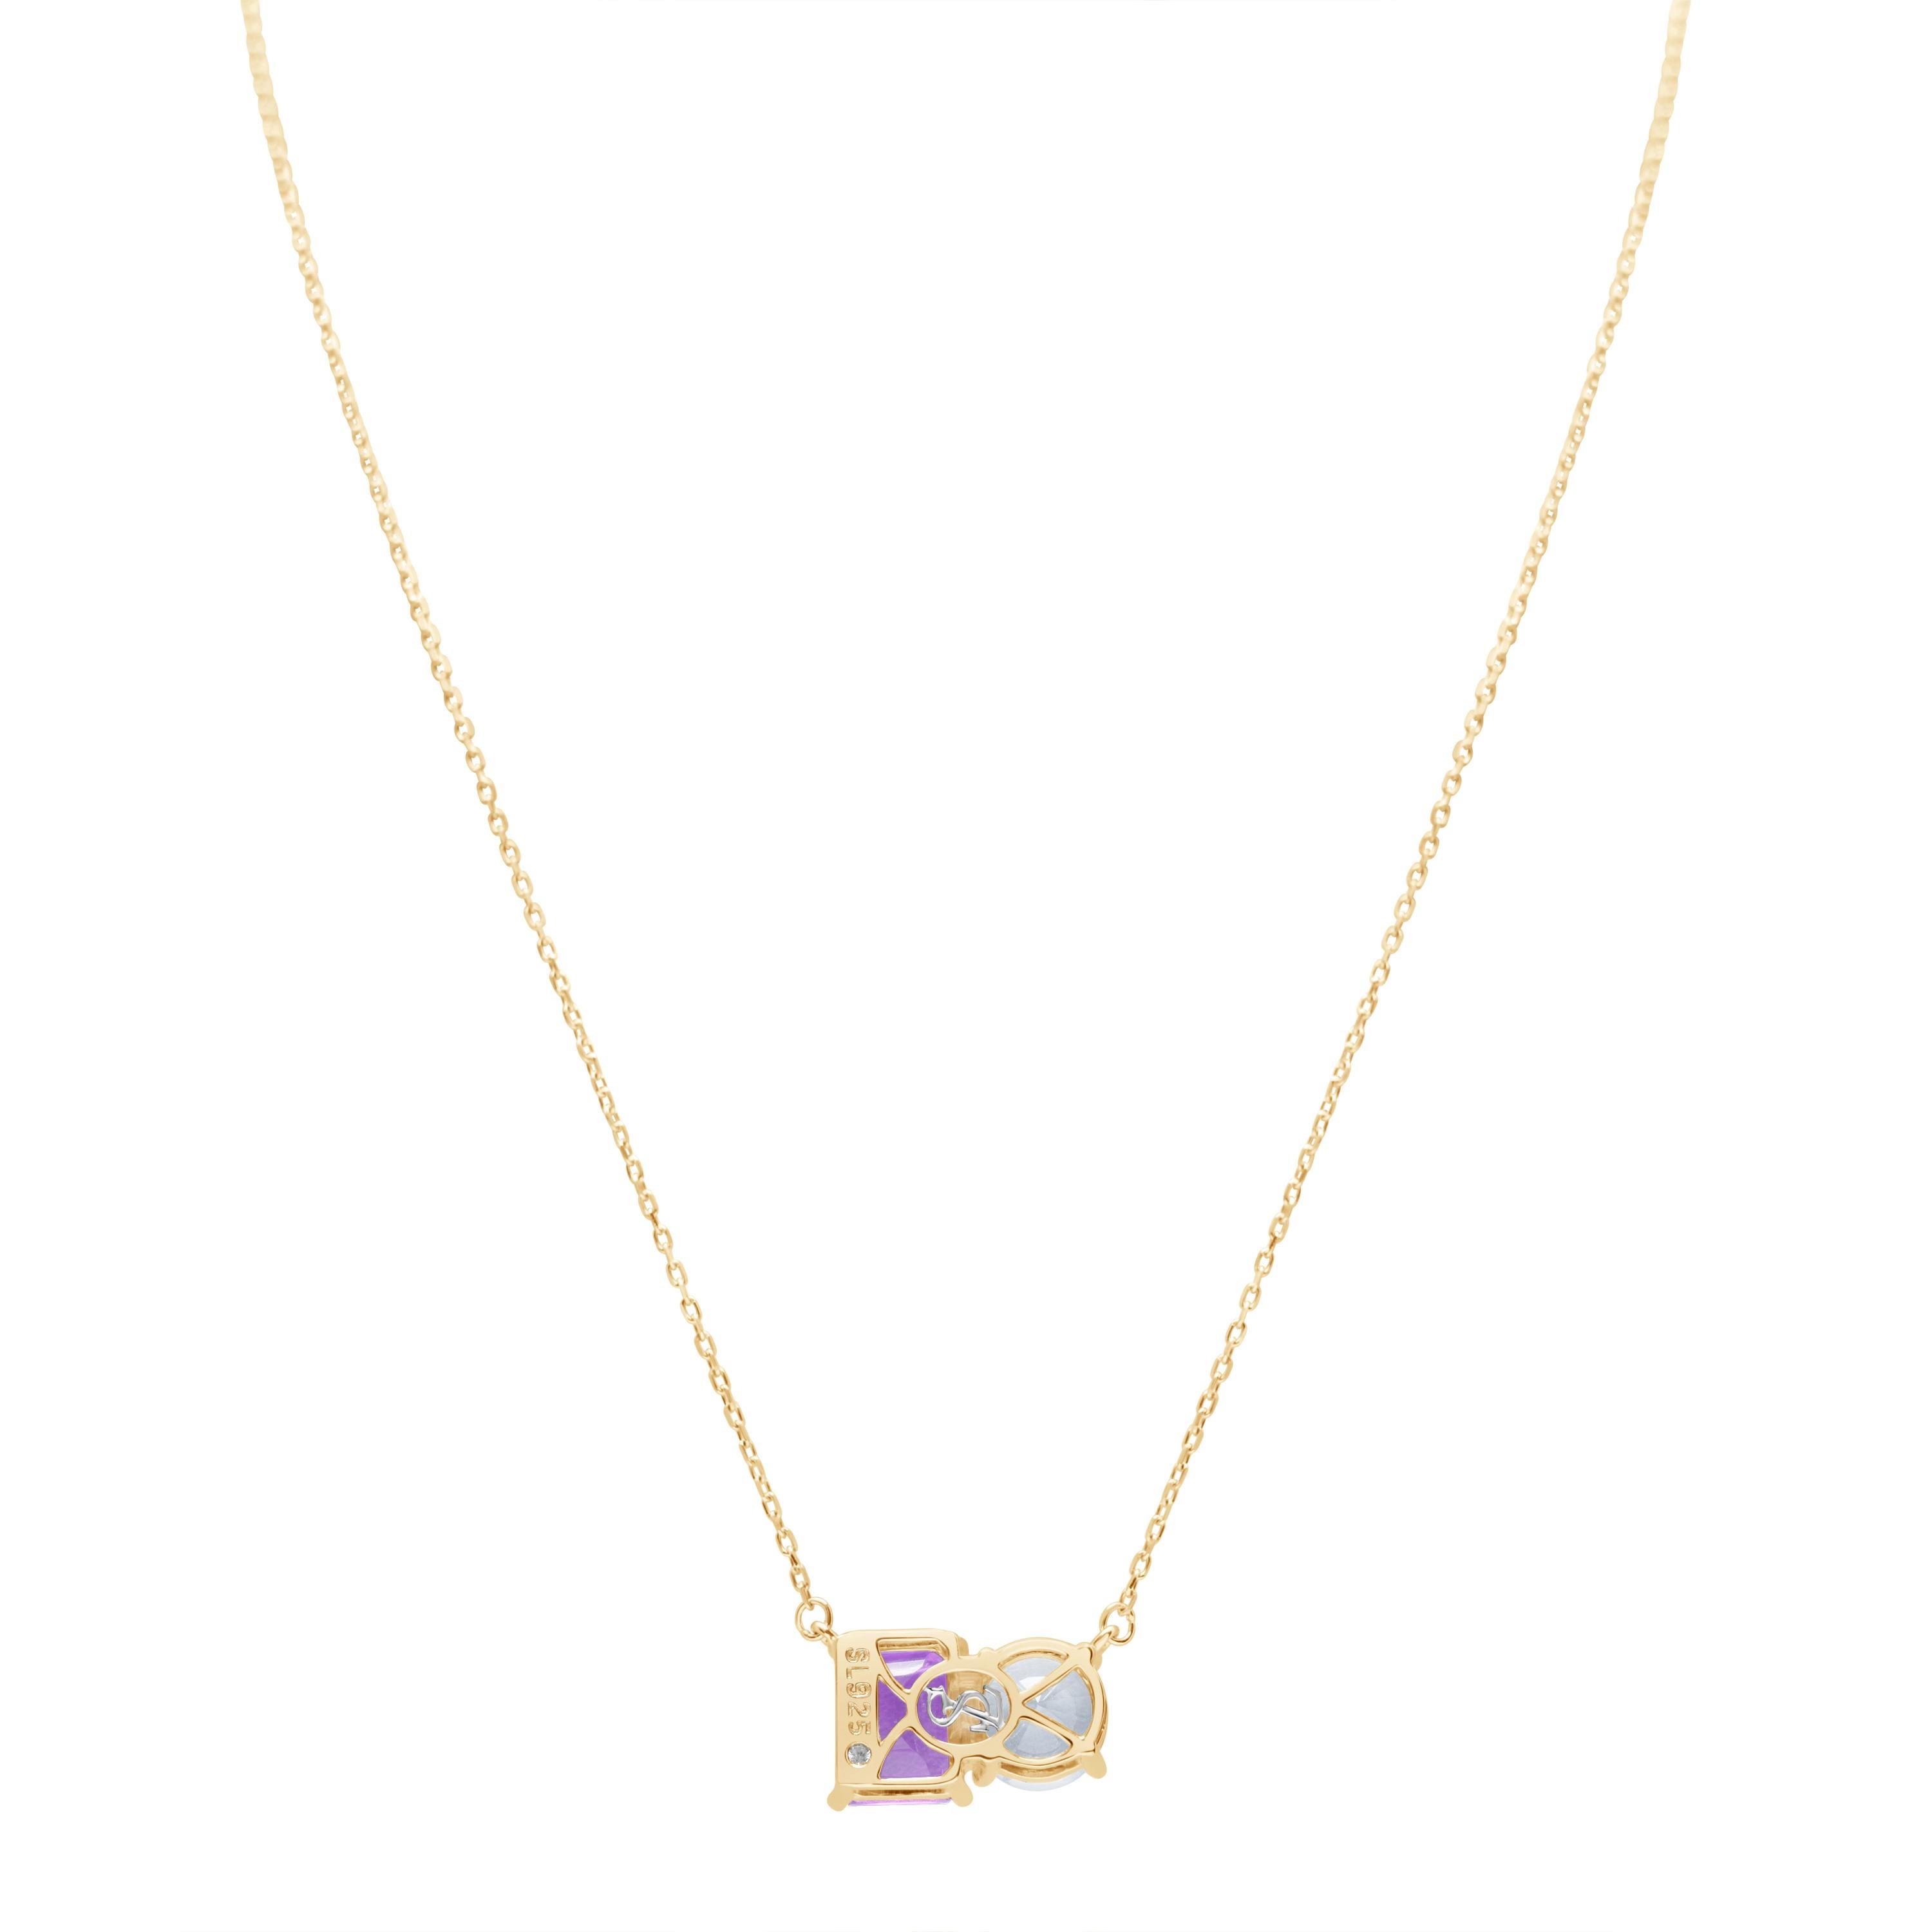 Shimmering in hues of white and purple, this Suzy Levian necklace is as on trend as can be, and features a round cut white topaz and an emerald cut purple amethyst as a perfectly matched pair. This necklace symbolizes a perfect pairing of unique